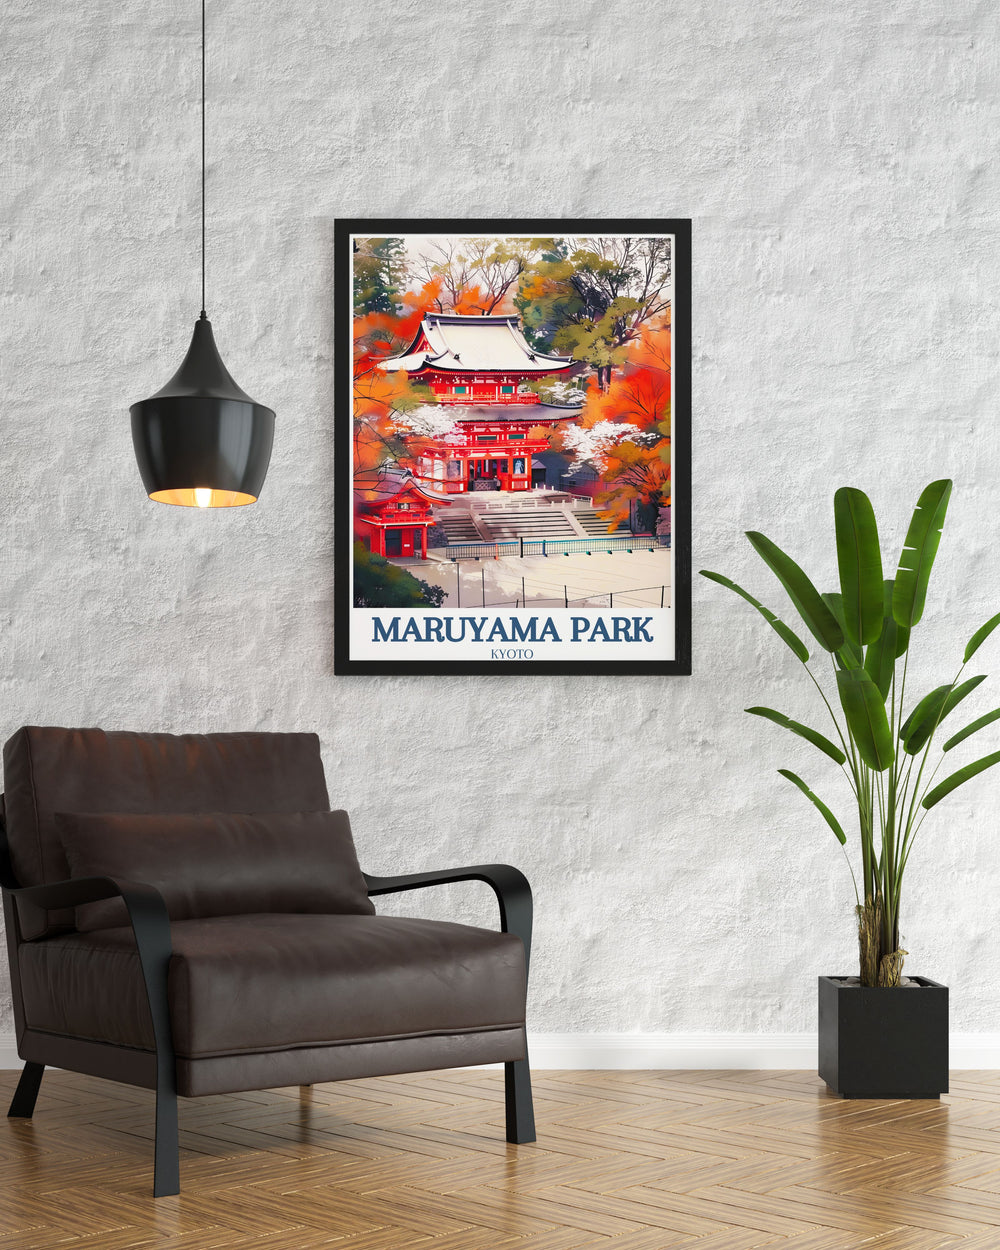 Stunning illustration of Kyoto Nishiromon gate Maruyama Park with vibrant cherry blossoms capturing the serene beauty of Japanese gardens a perfect addition to Japan home decor and a thoughtful gift for friends and family who admire Japanese culture